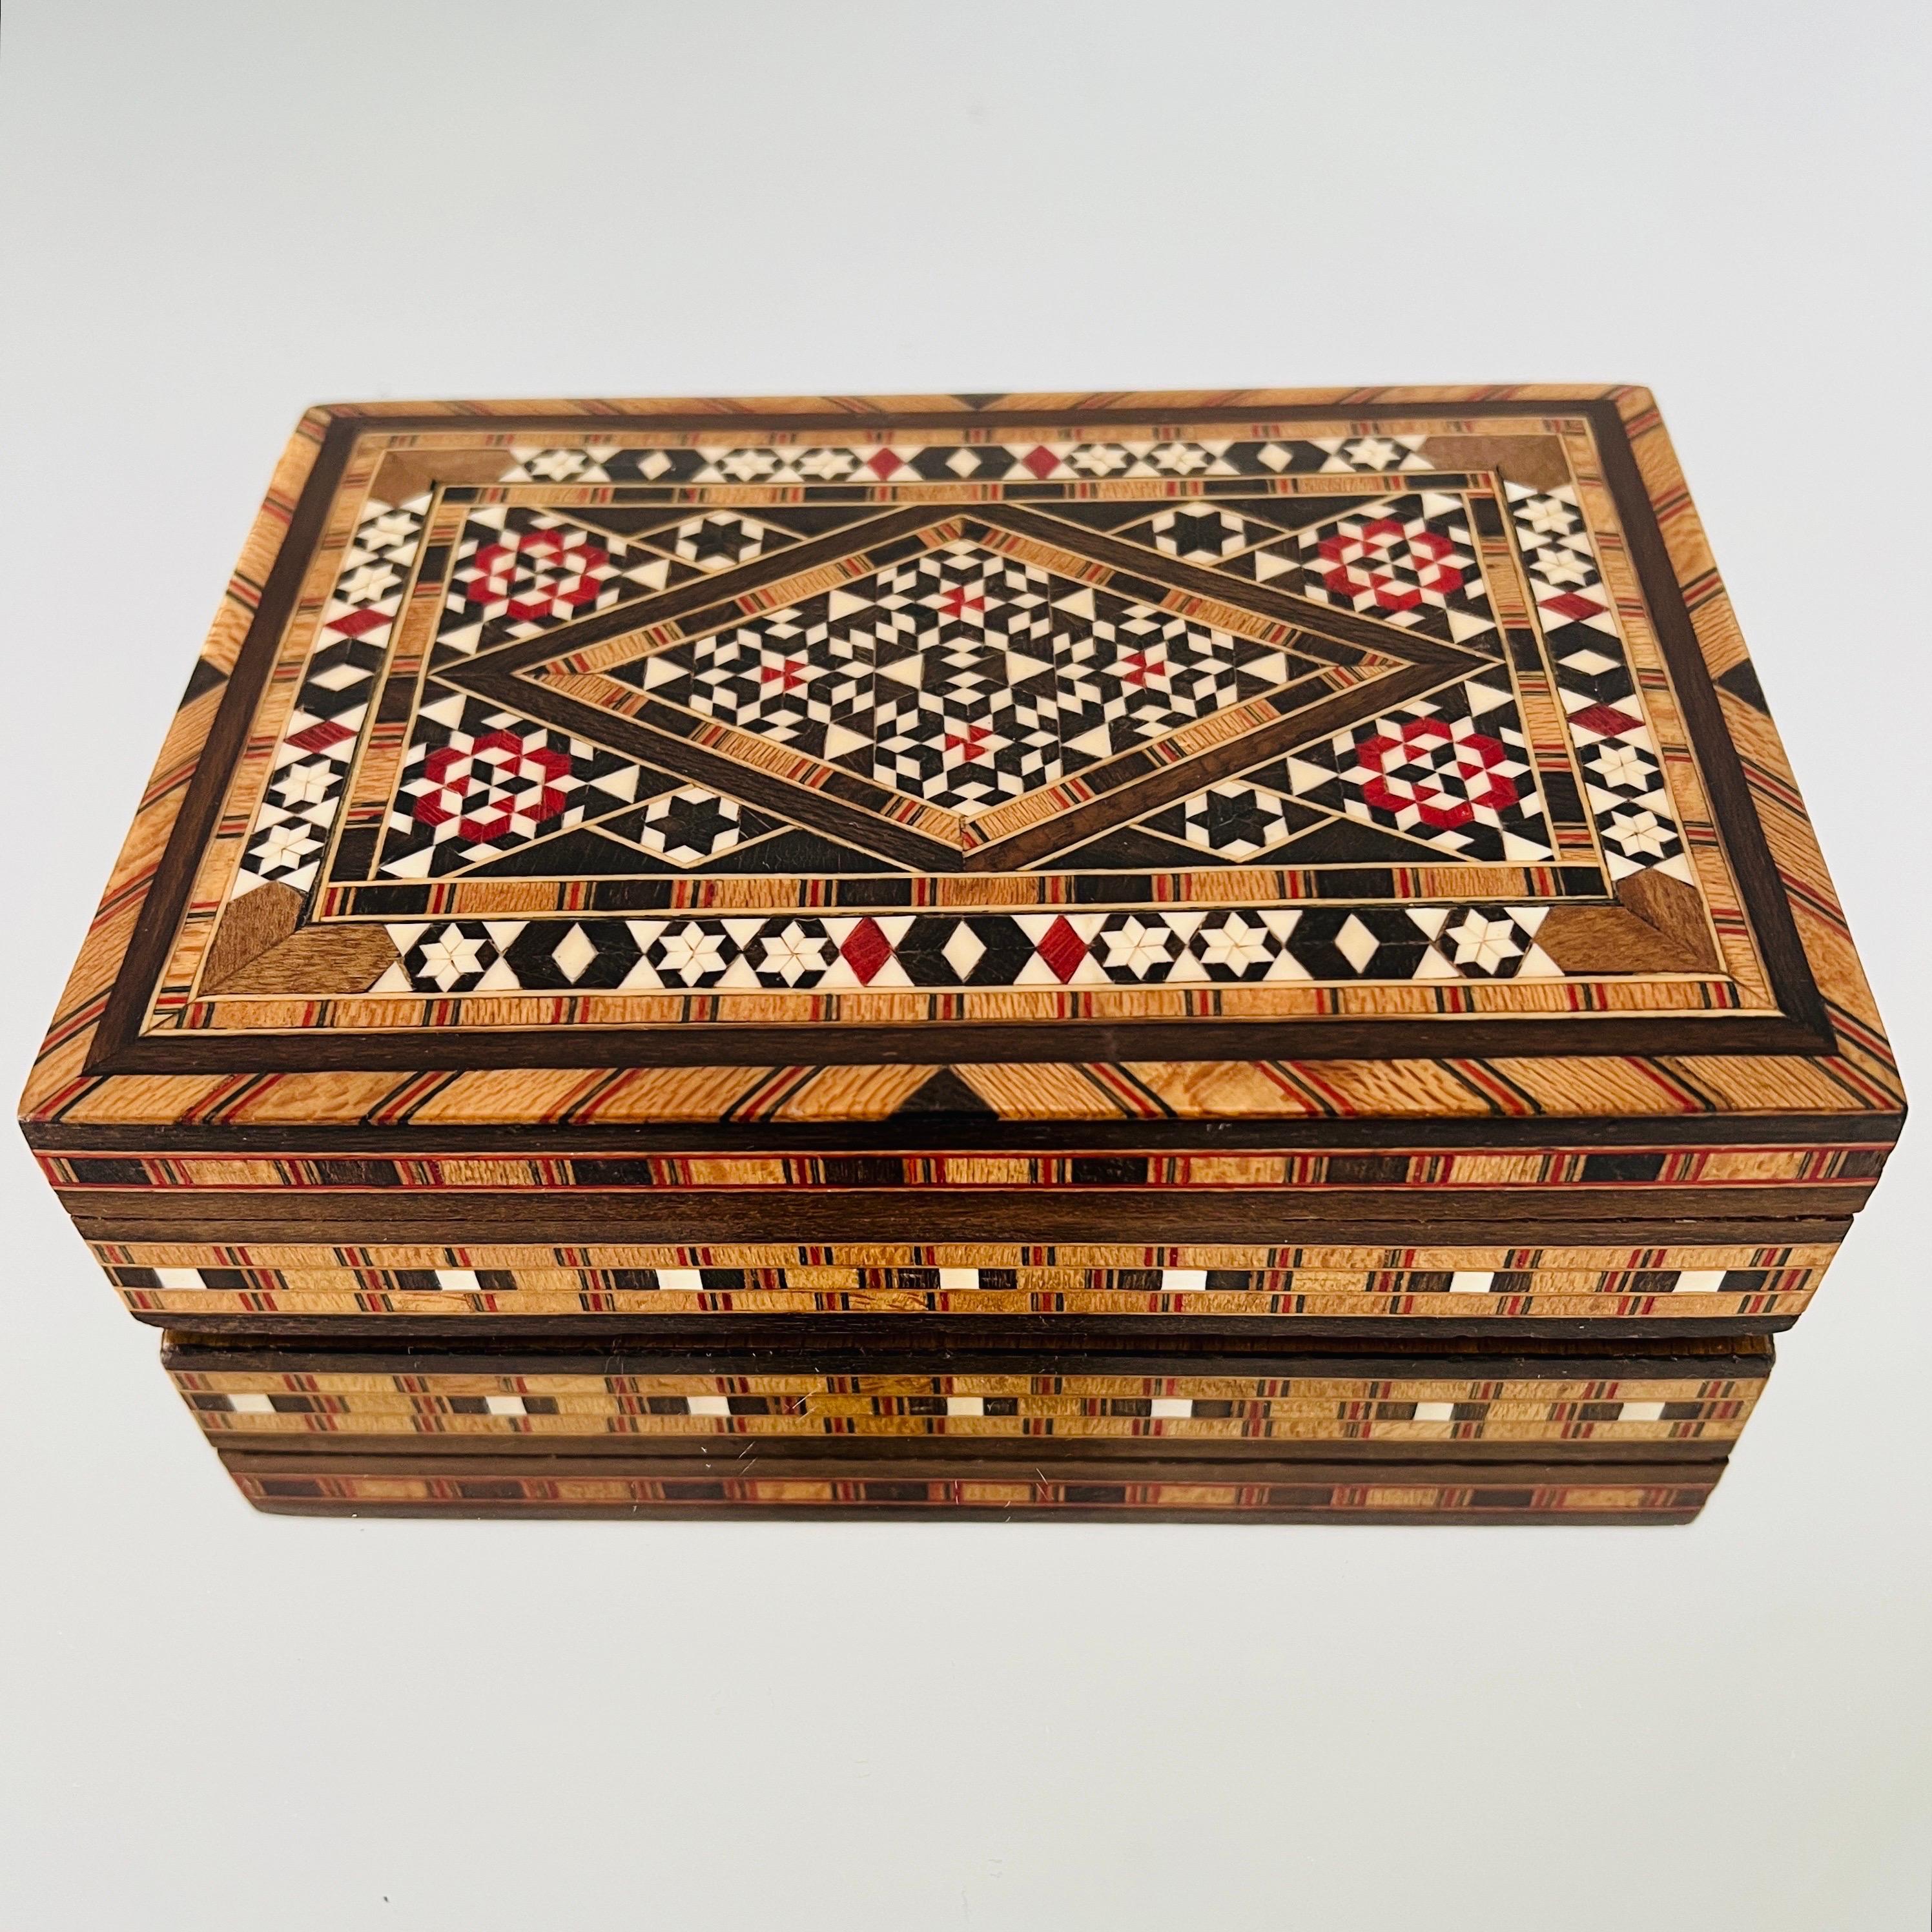 Exquisite handcrafted Khatam wood box with micro mosaic marquetry design, an Ancient Persian technique of inlaying.  Moorish style box features geometric inlays of wood and bone. Artisanal craftsmanship with hinged lid and interior lined in red